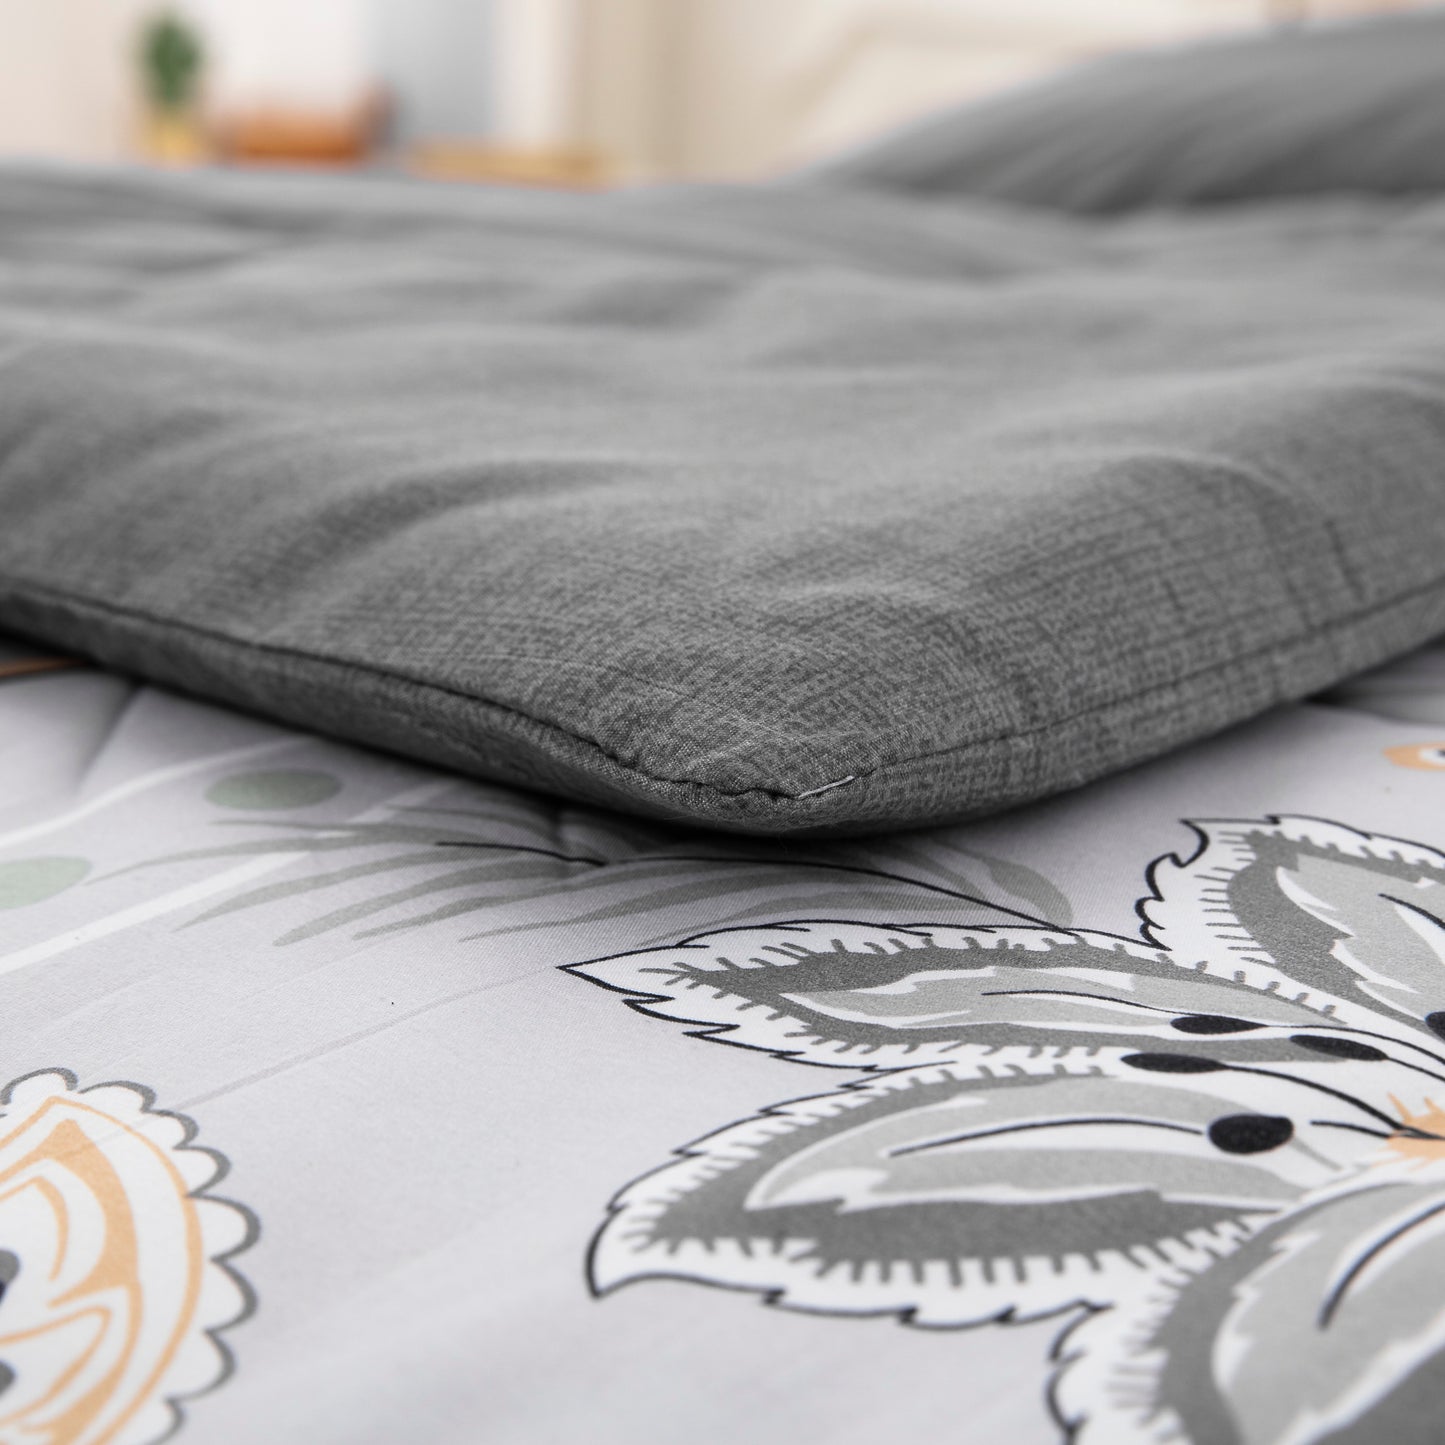 Grey Design Embroidery Comforter set with 2 Pillow Cases